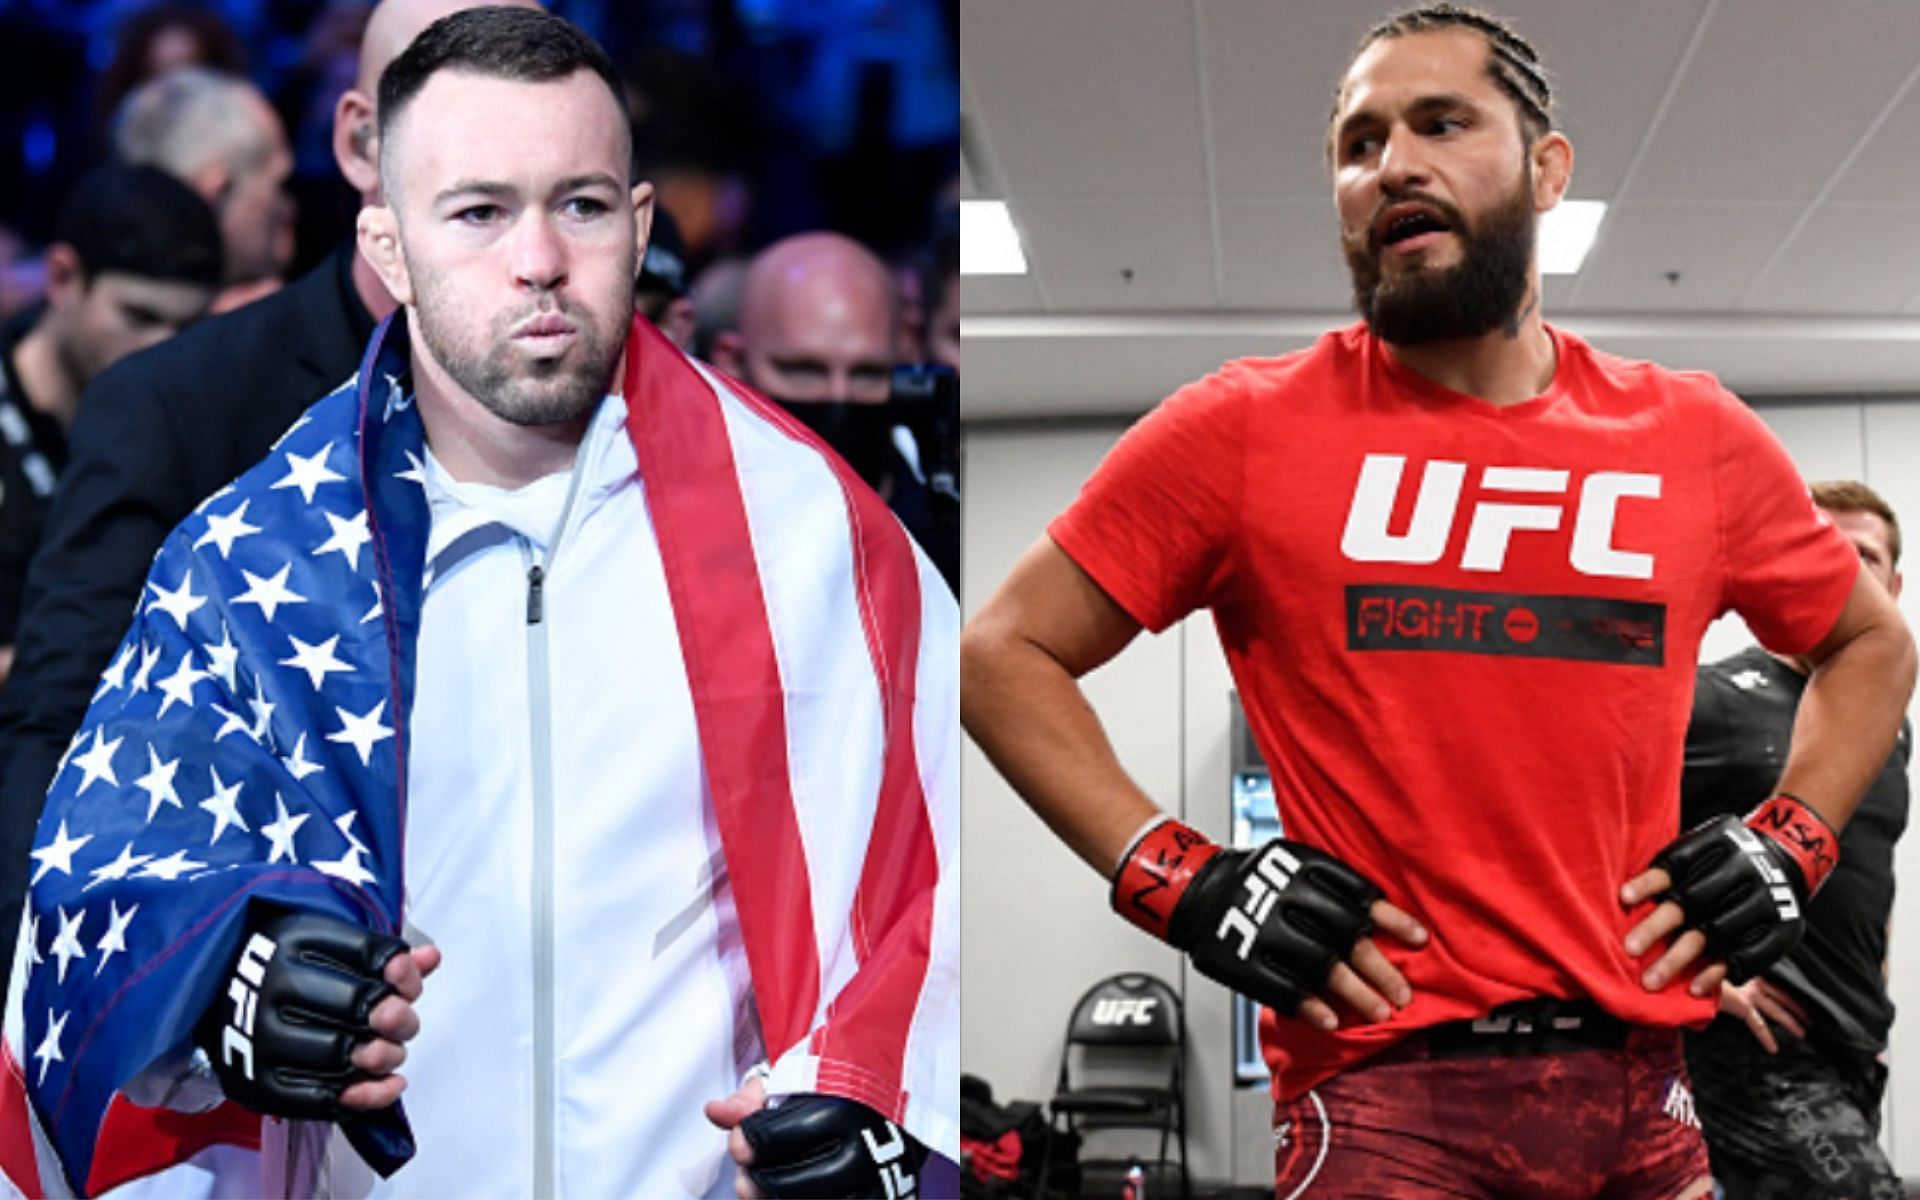 “It’s going to be a funeral” – Colby Covington predicts the outcome of grudge match against Jorge Masvidal at UFC 272